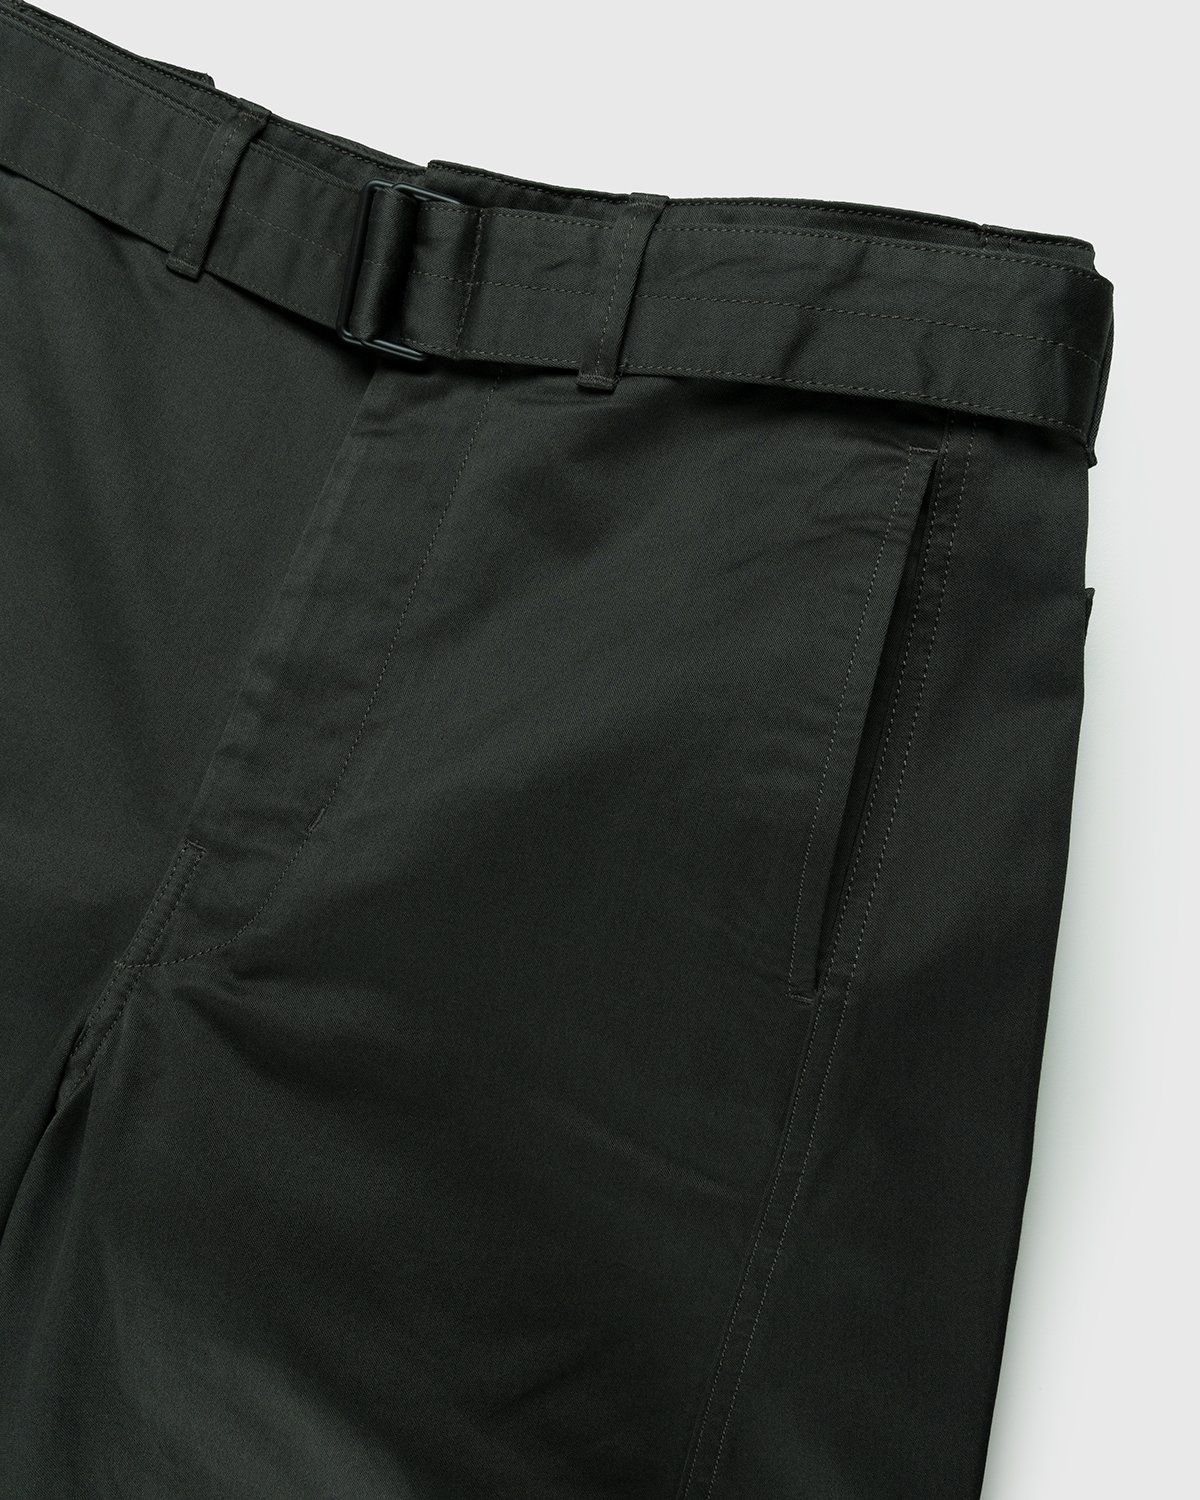 Lemaire – Twisted Belted Pants Dark Slate Green - Trousers - Grey - Image 4